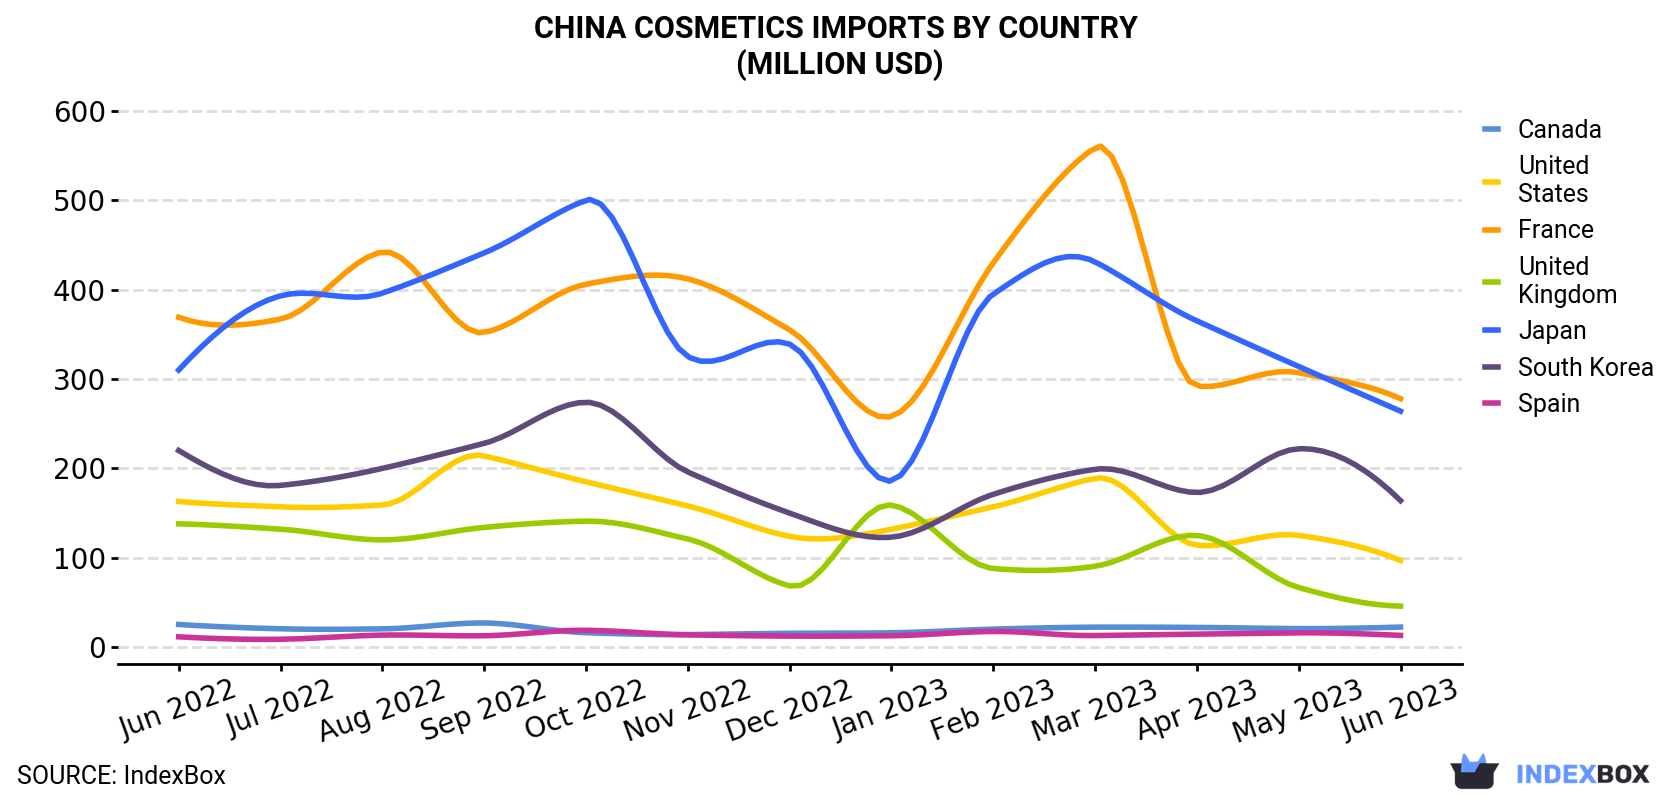 China Cosmetics Imports By Country (Million USD)